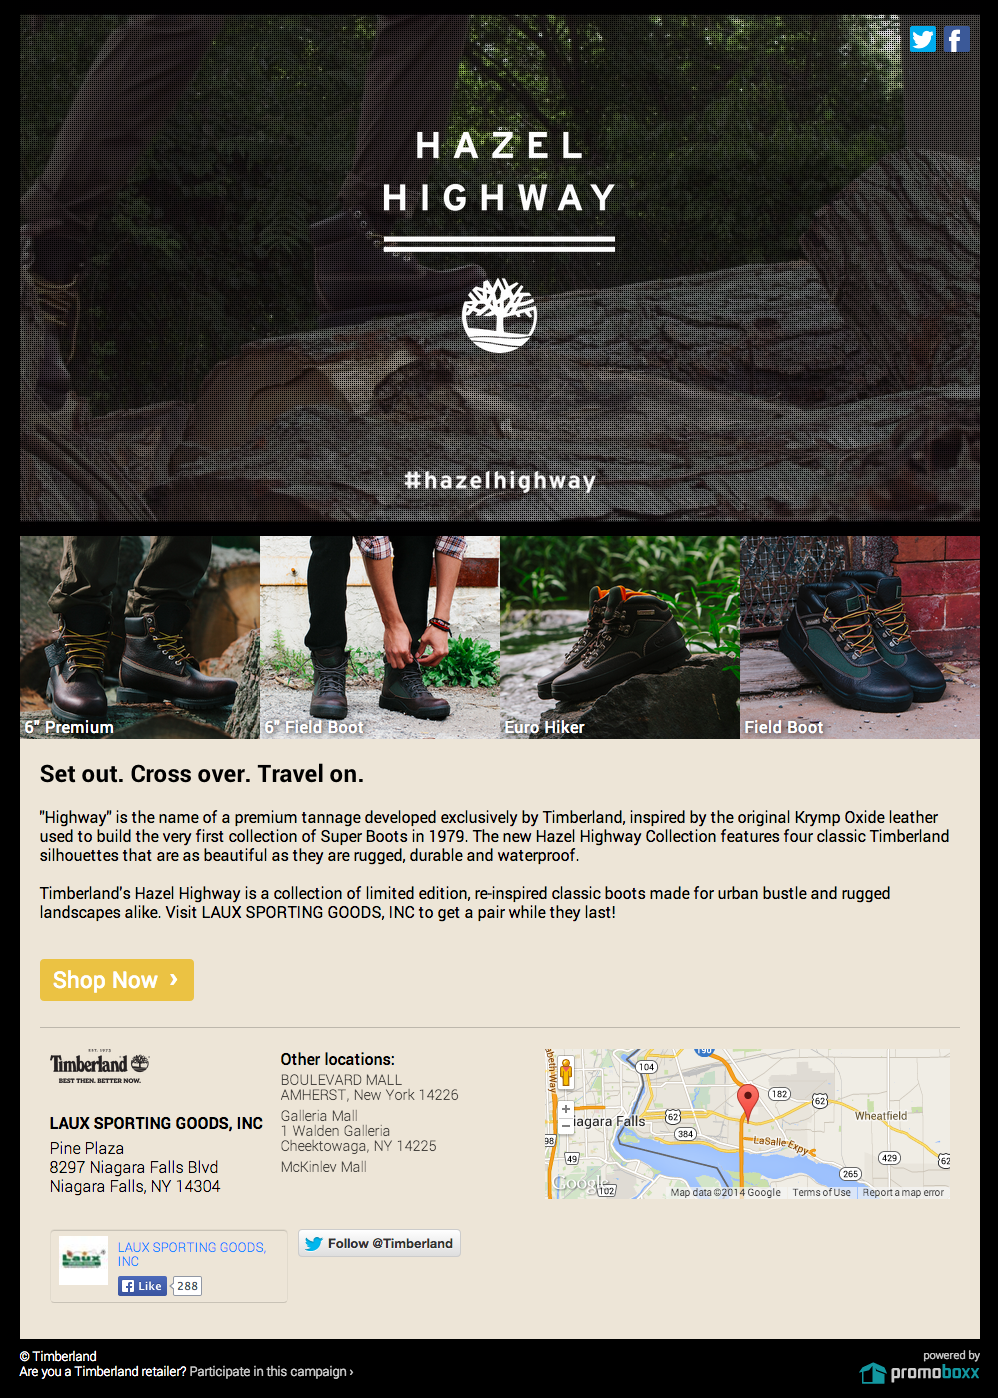 TImberland Co-Branded Hazel Highway Campaign